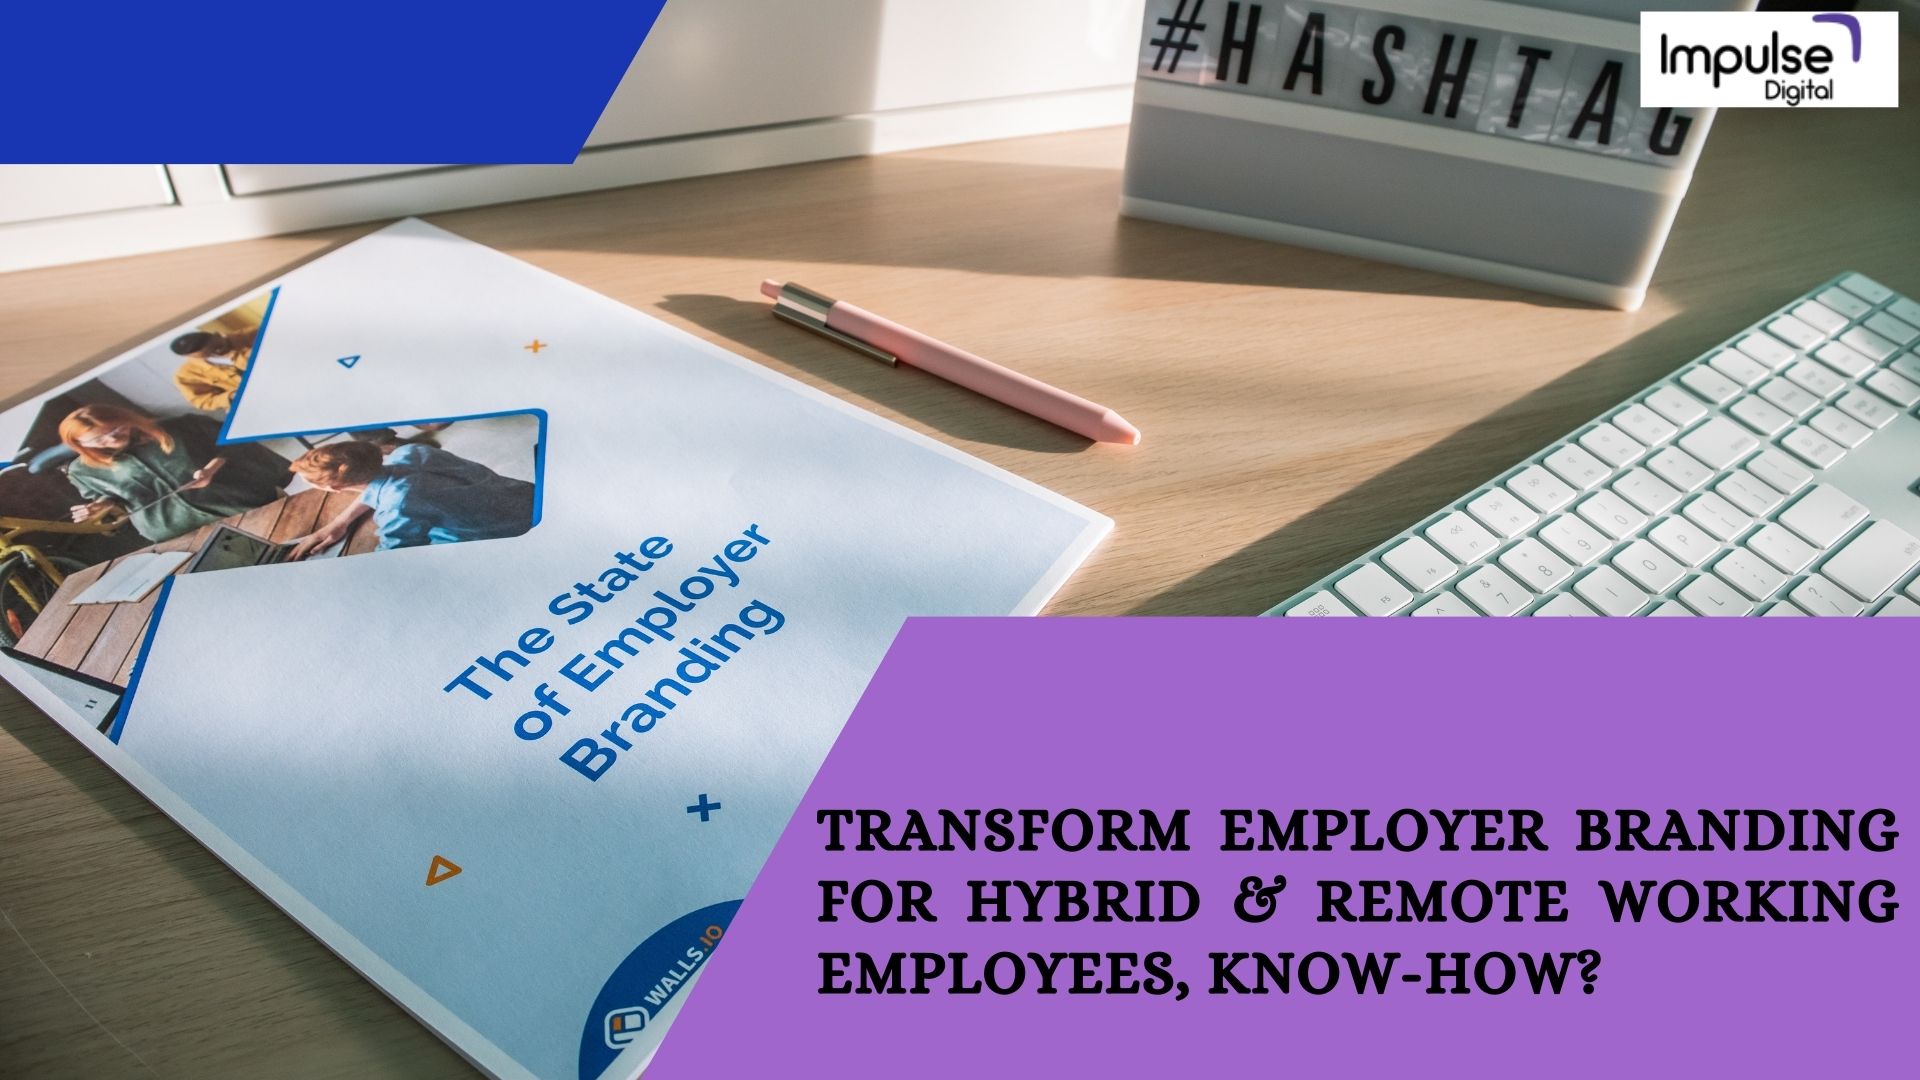 transform-employer-branding-for-hybrid-&-remote-working-employees-know-how